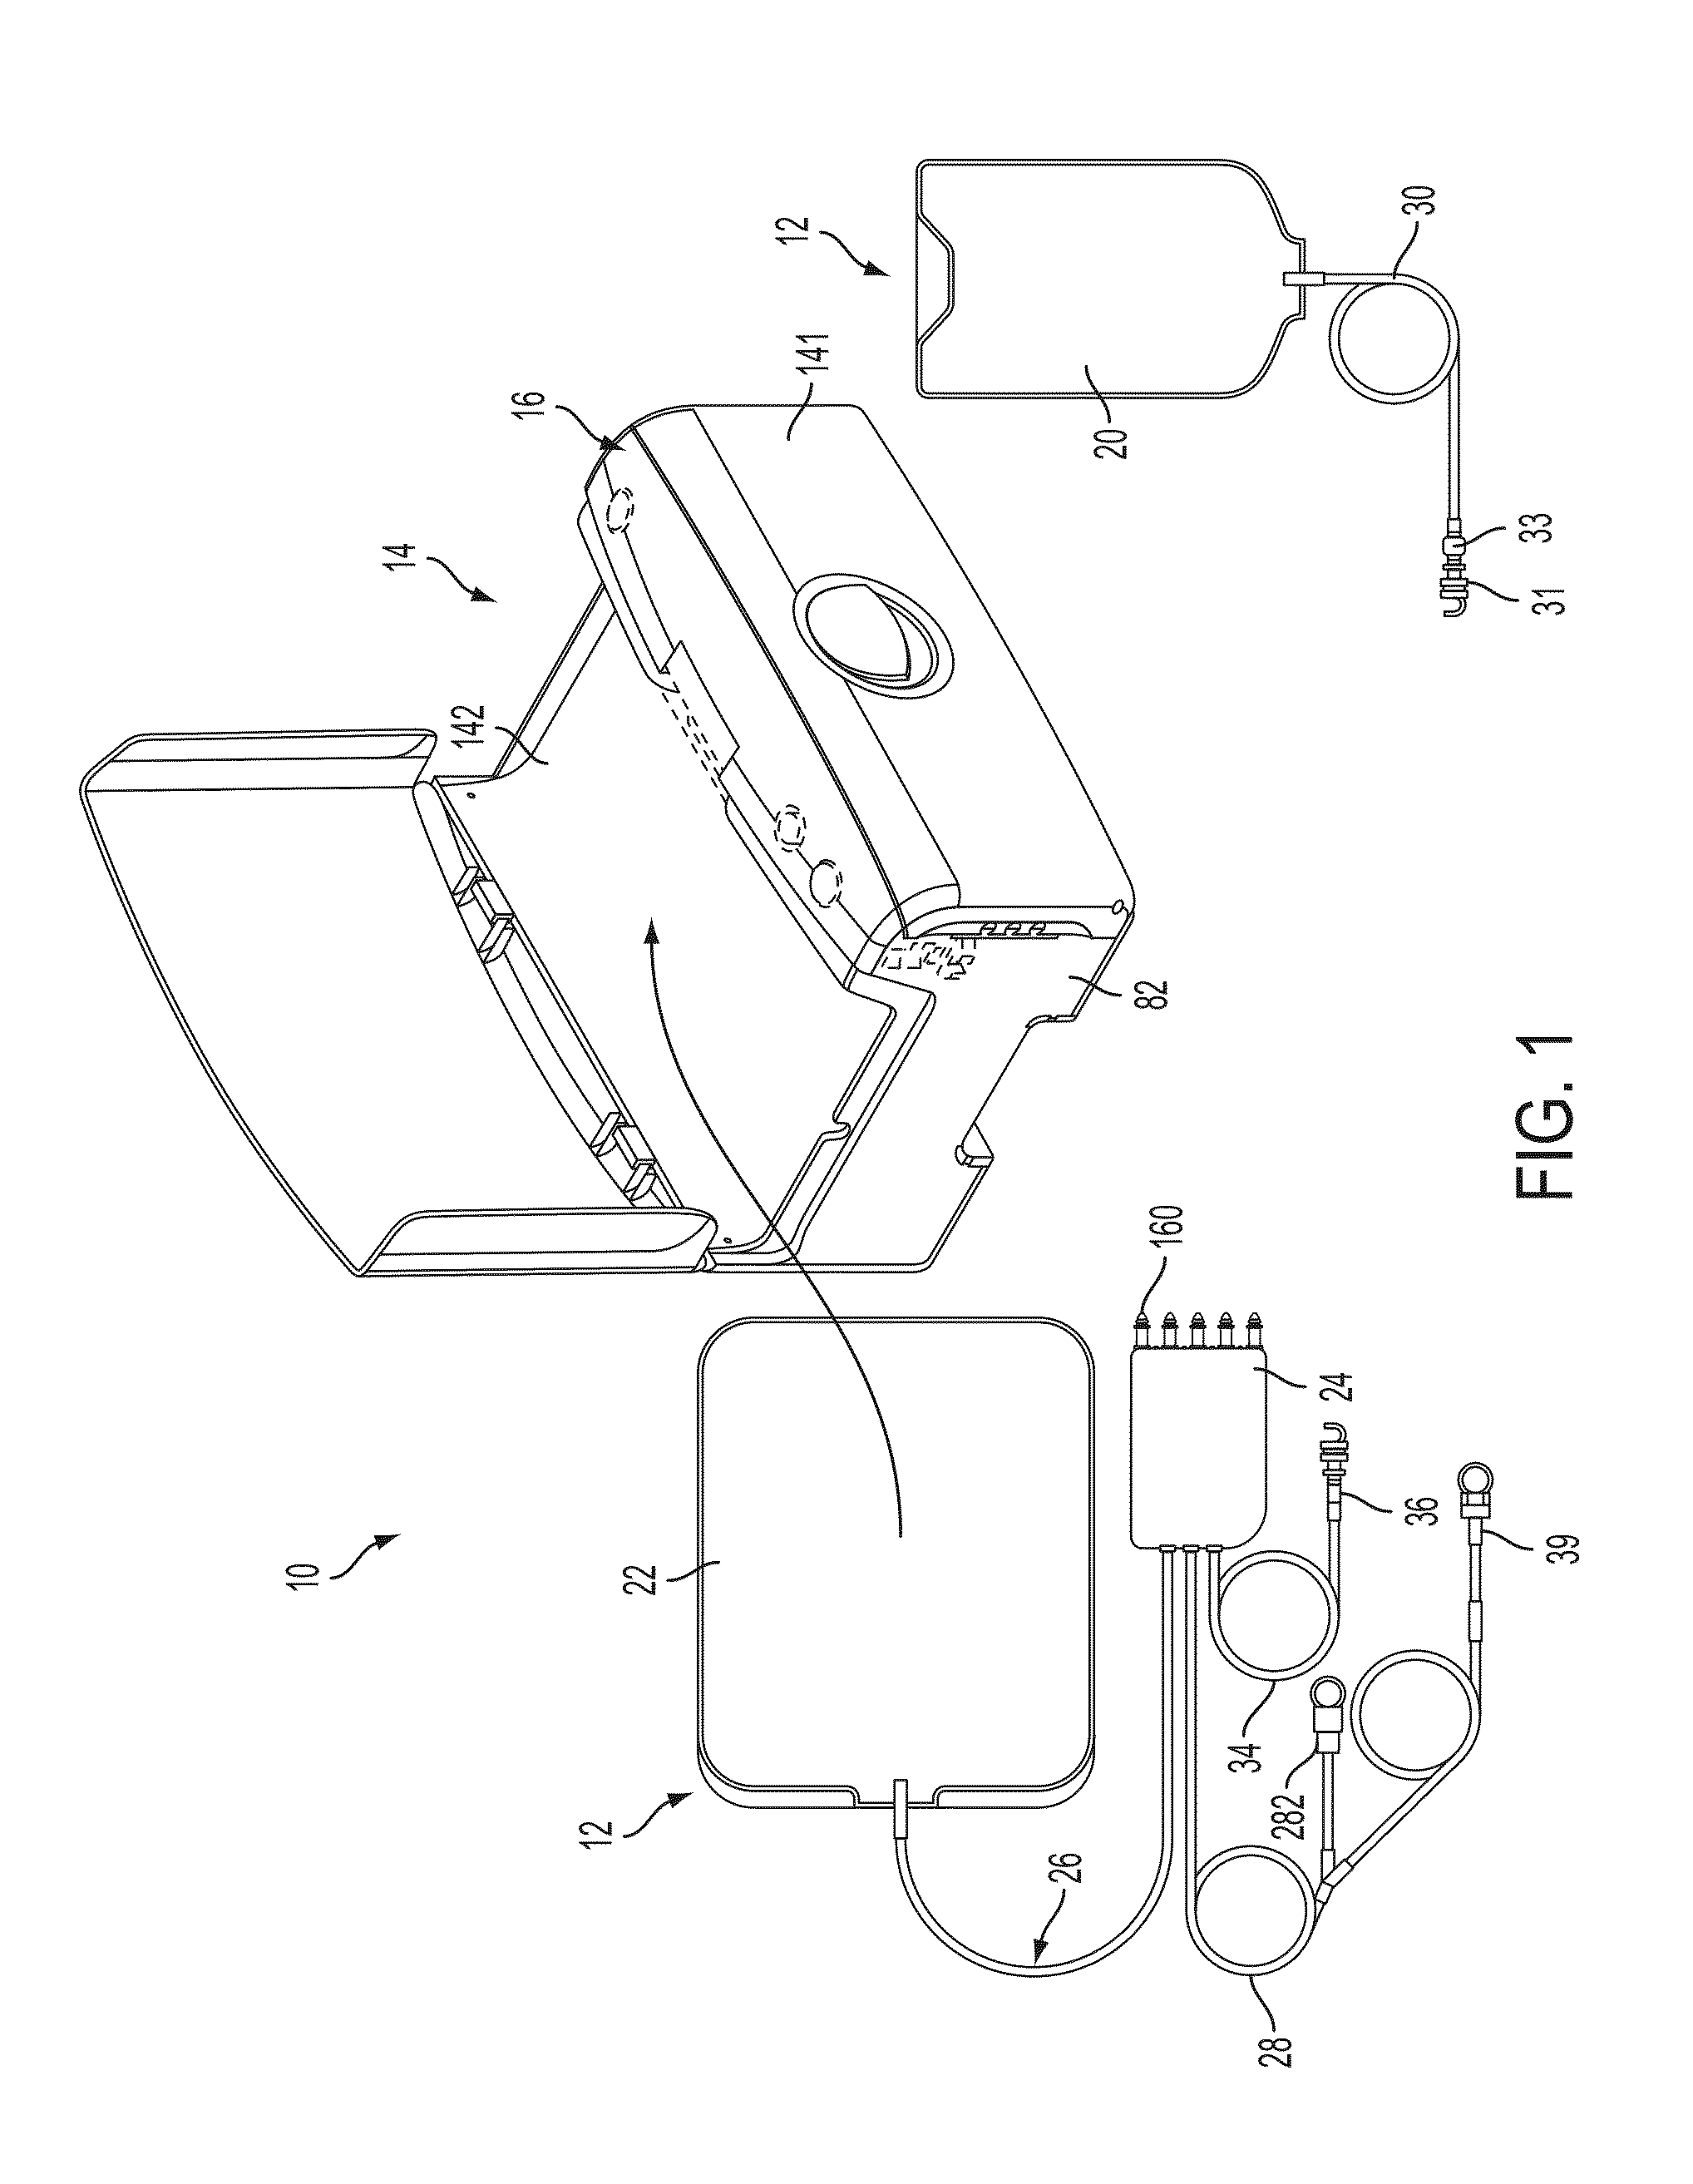 Medical Treatment System and Methods Using a Plurality of Fluid Lines